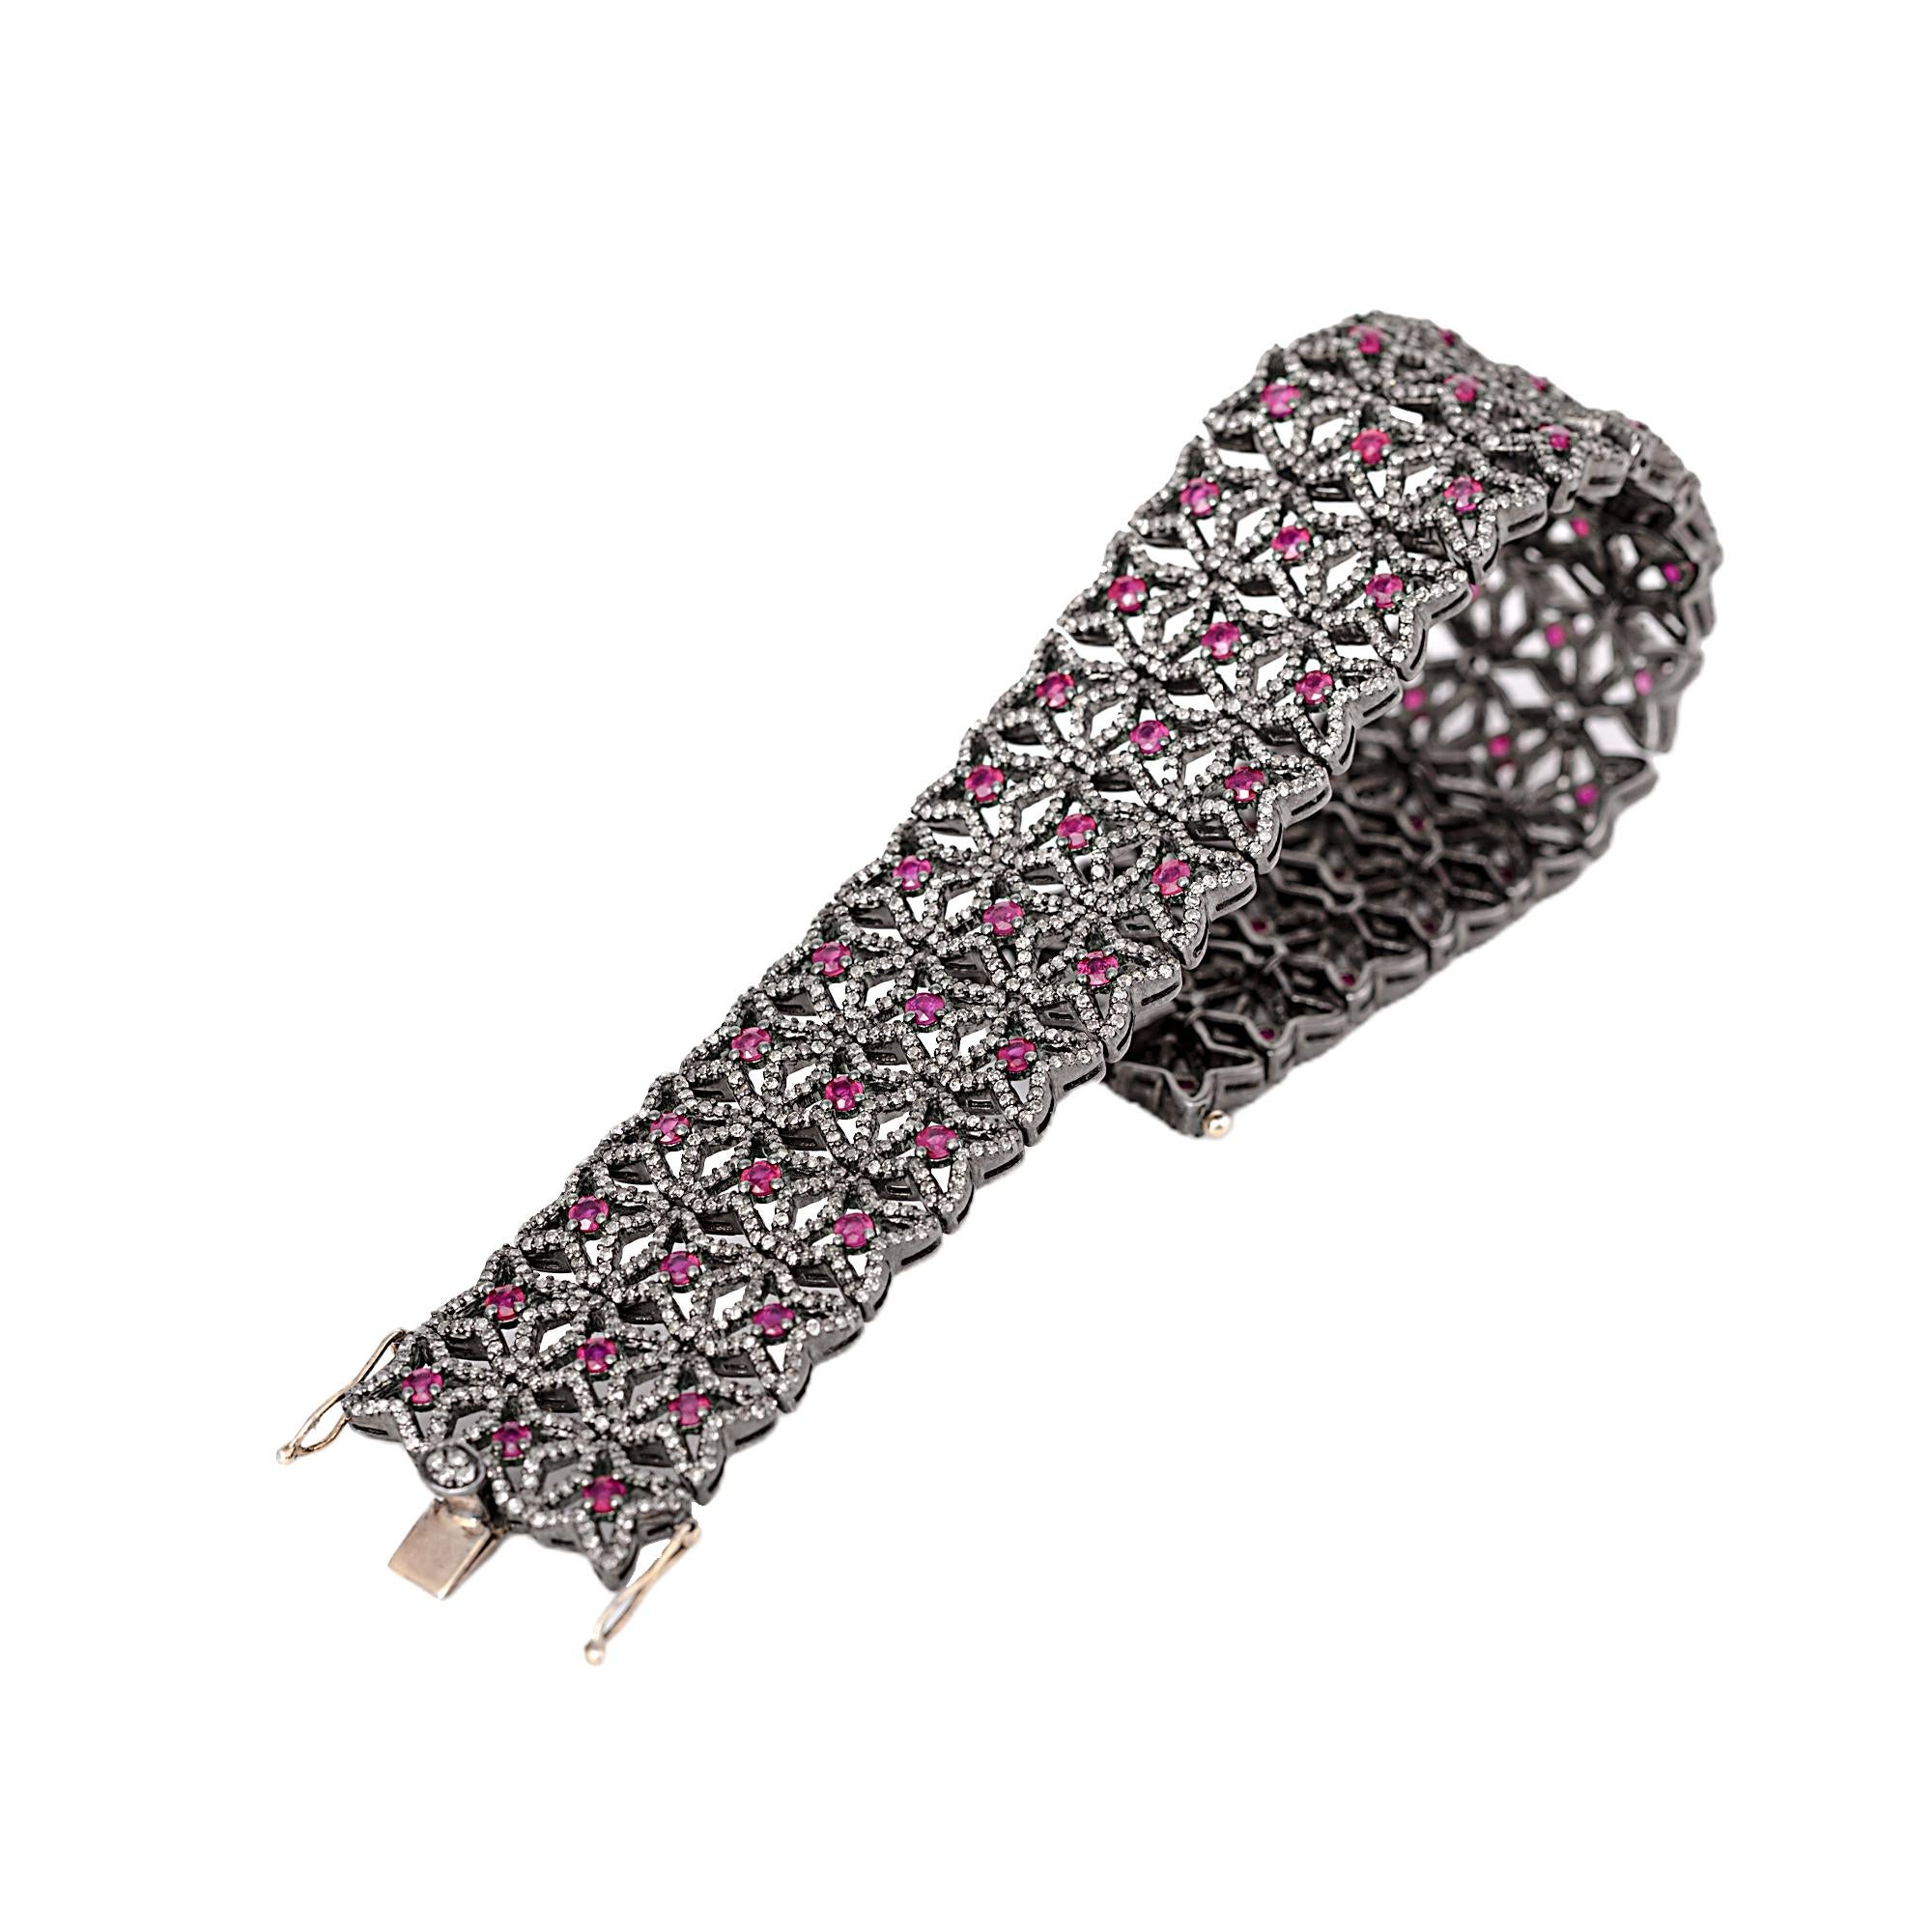 8.63 Carat Diamond and Ruby Vintage-Style Retro Bracelet

This Victorian period art-deco style magnanimous fiery red ruby and diamond star shape bracelet is impressive. The open/hollow star formed with pave set round diamond bordering the star with